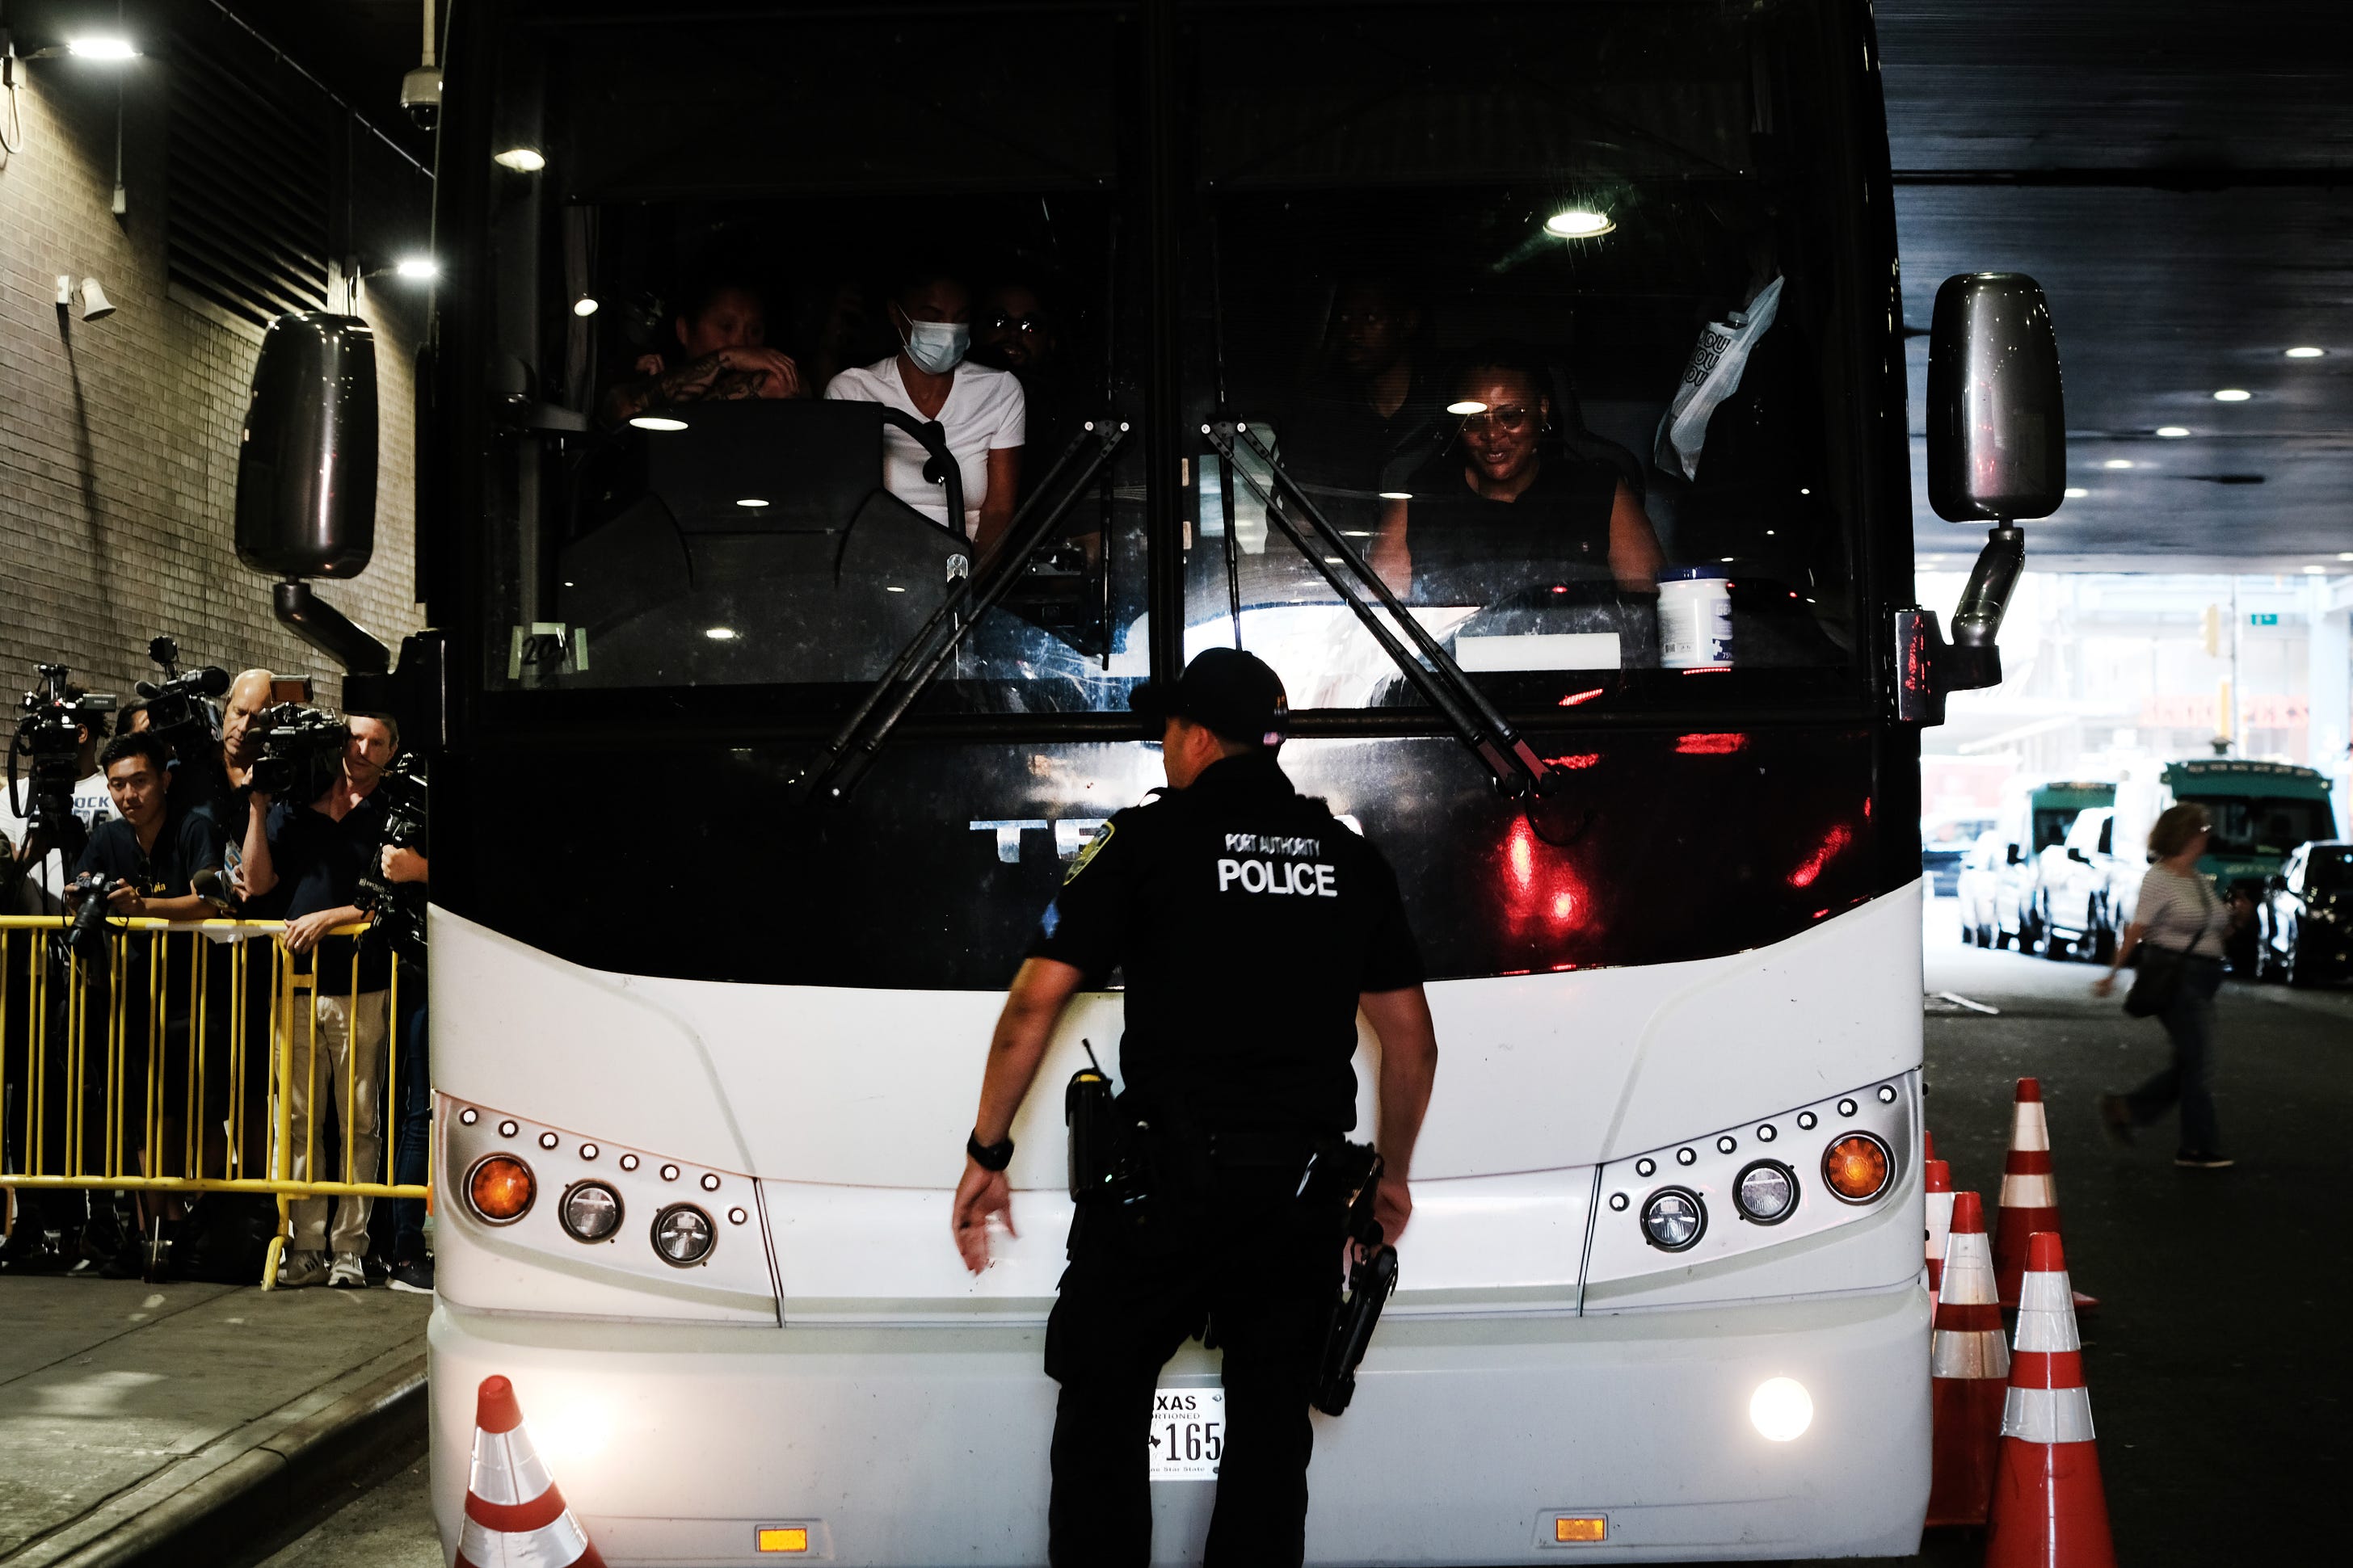 A bus carrying migrants who crossed the border from Mexico into Texas arrives in New York City. (Photo by Spencer Platt/Getty Images)